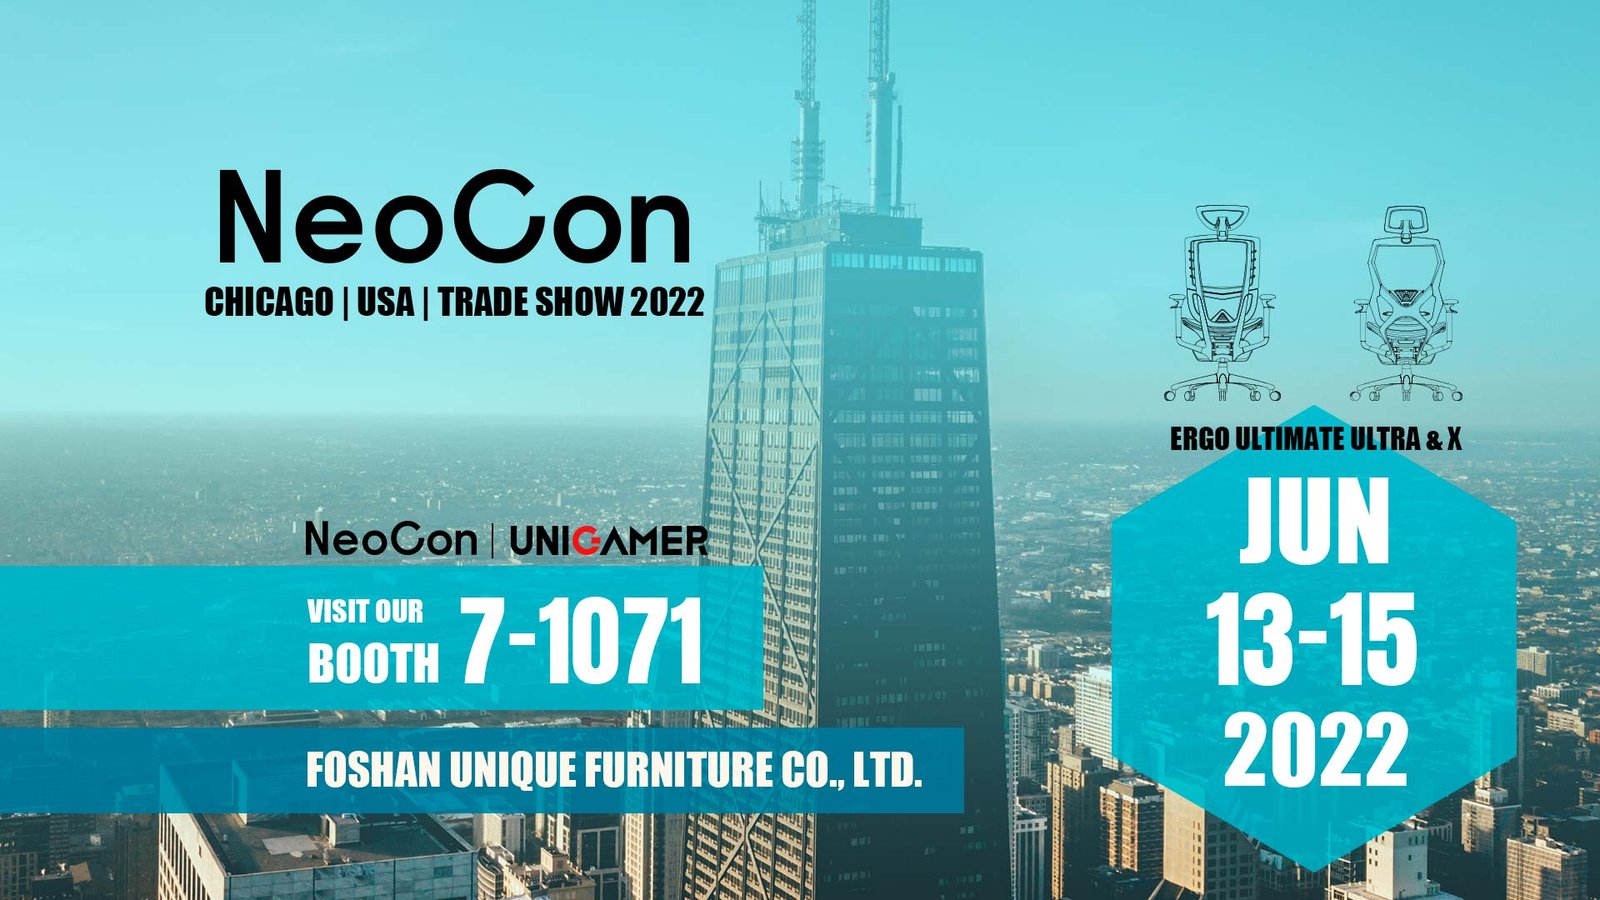 WE WILL ATTEND AT NEOCON 2022 USA Unigamer Furniture, Gears, Chairs